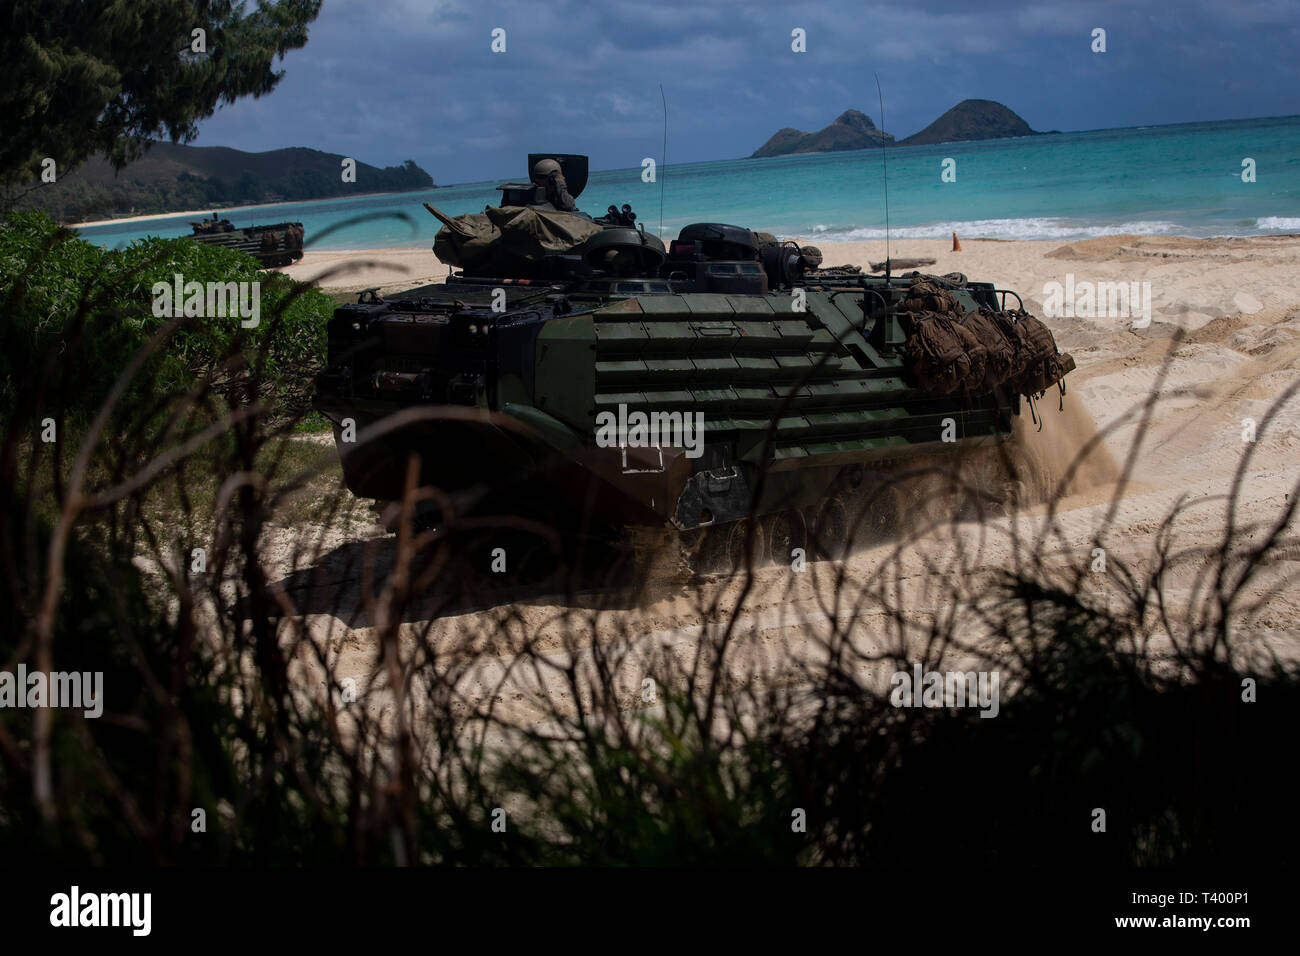 A U.S. Marine Corps amphibious assault vehicle assigned to Combat Assault Company, 3d Marine Regiment, travels through beaches during an amphibious assault exercise at Marine Corps Training Area Bellows, Marine Corps Base Hawaii, Apr. 9, 2019. The unit conducted a simulated beach assault to improve their lethality and cooperation, as a mechanized unit and force in readiness. (U.S. Marine Corps photo by Sgt. Alex Kouns) Stock Photo